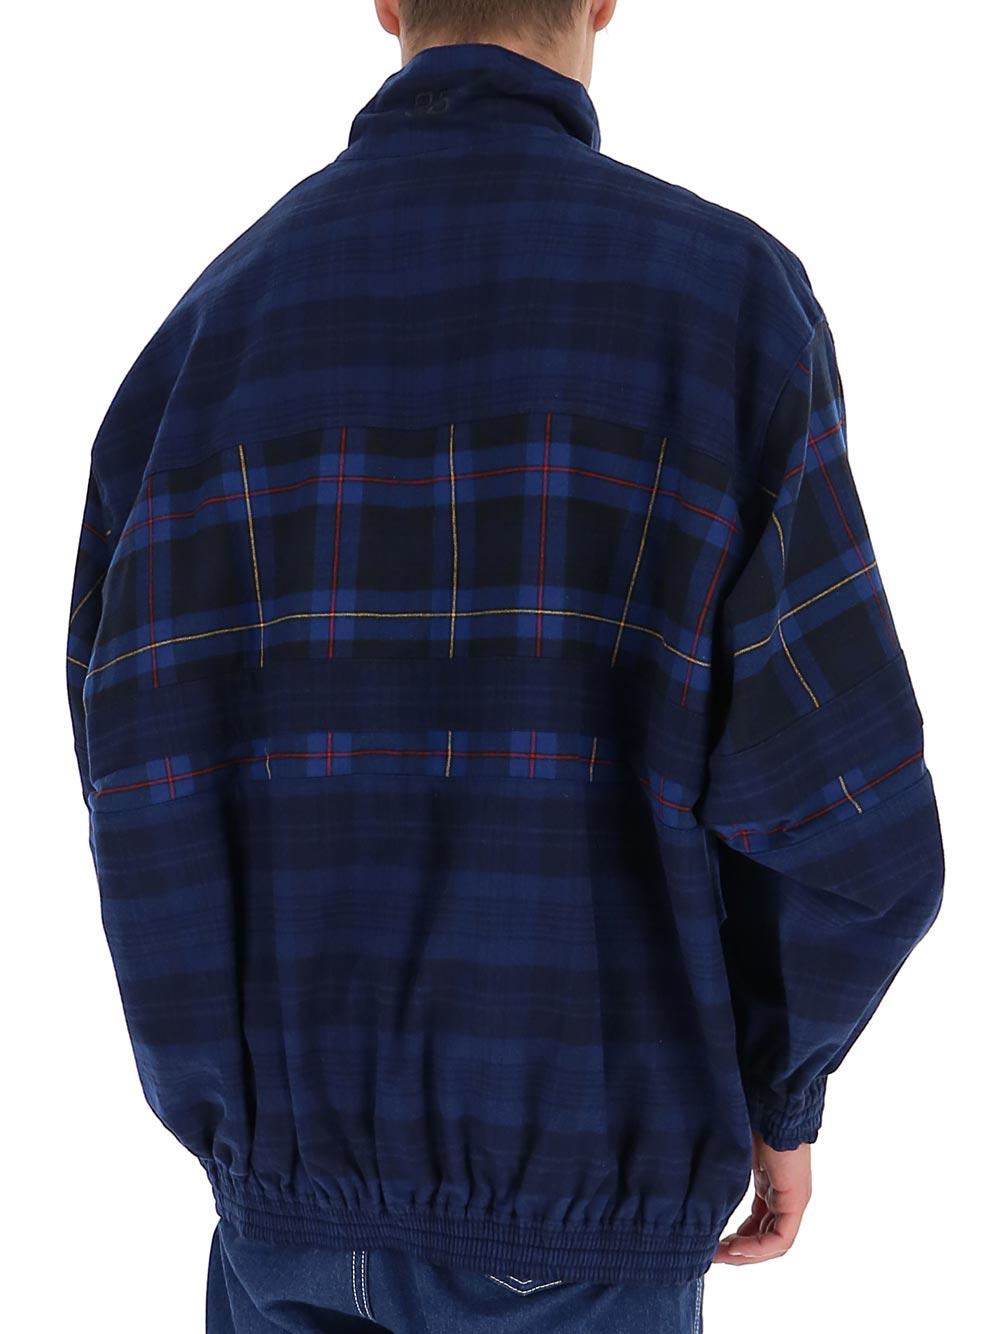 Balenciaga Wool Plaid Zip-up Jacket in Navy (Blue) for Men | Lyst